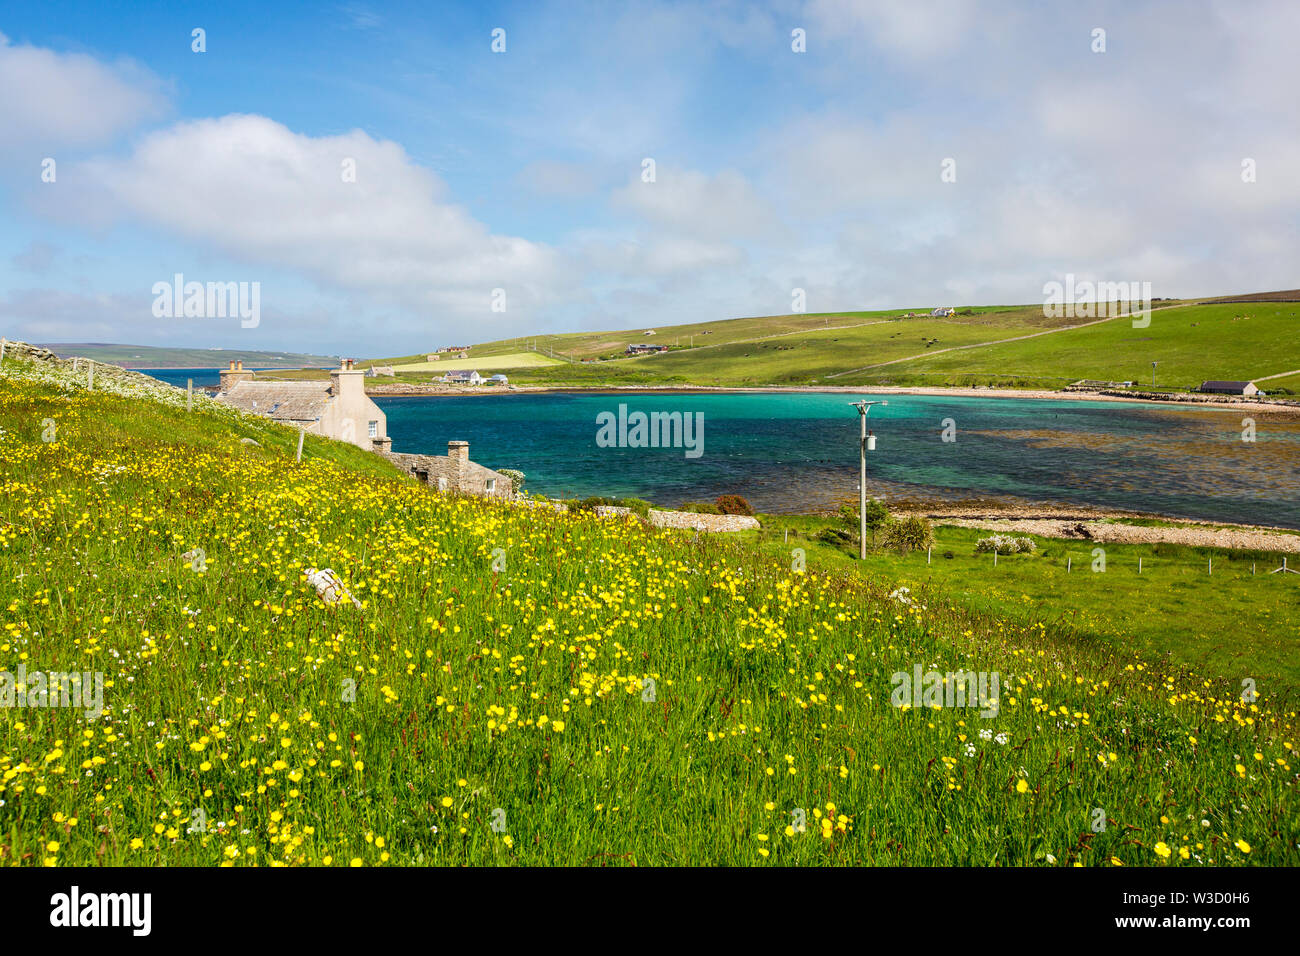 A house overlooking the Dam of Hoxa, South Ronaldsay, Orkney Islands, Scotland, UK, with a traditional hay meadow full of Buttercups. Stock Photo